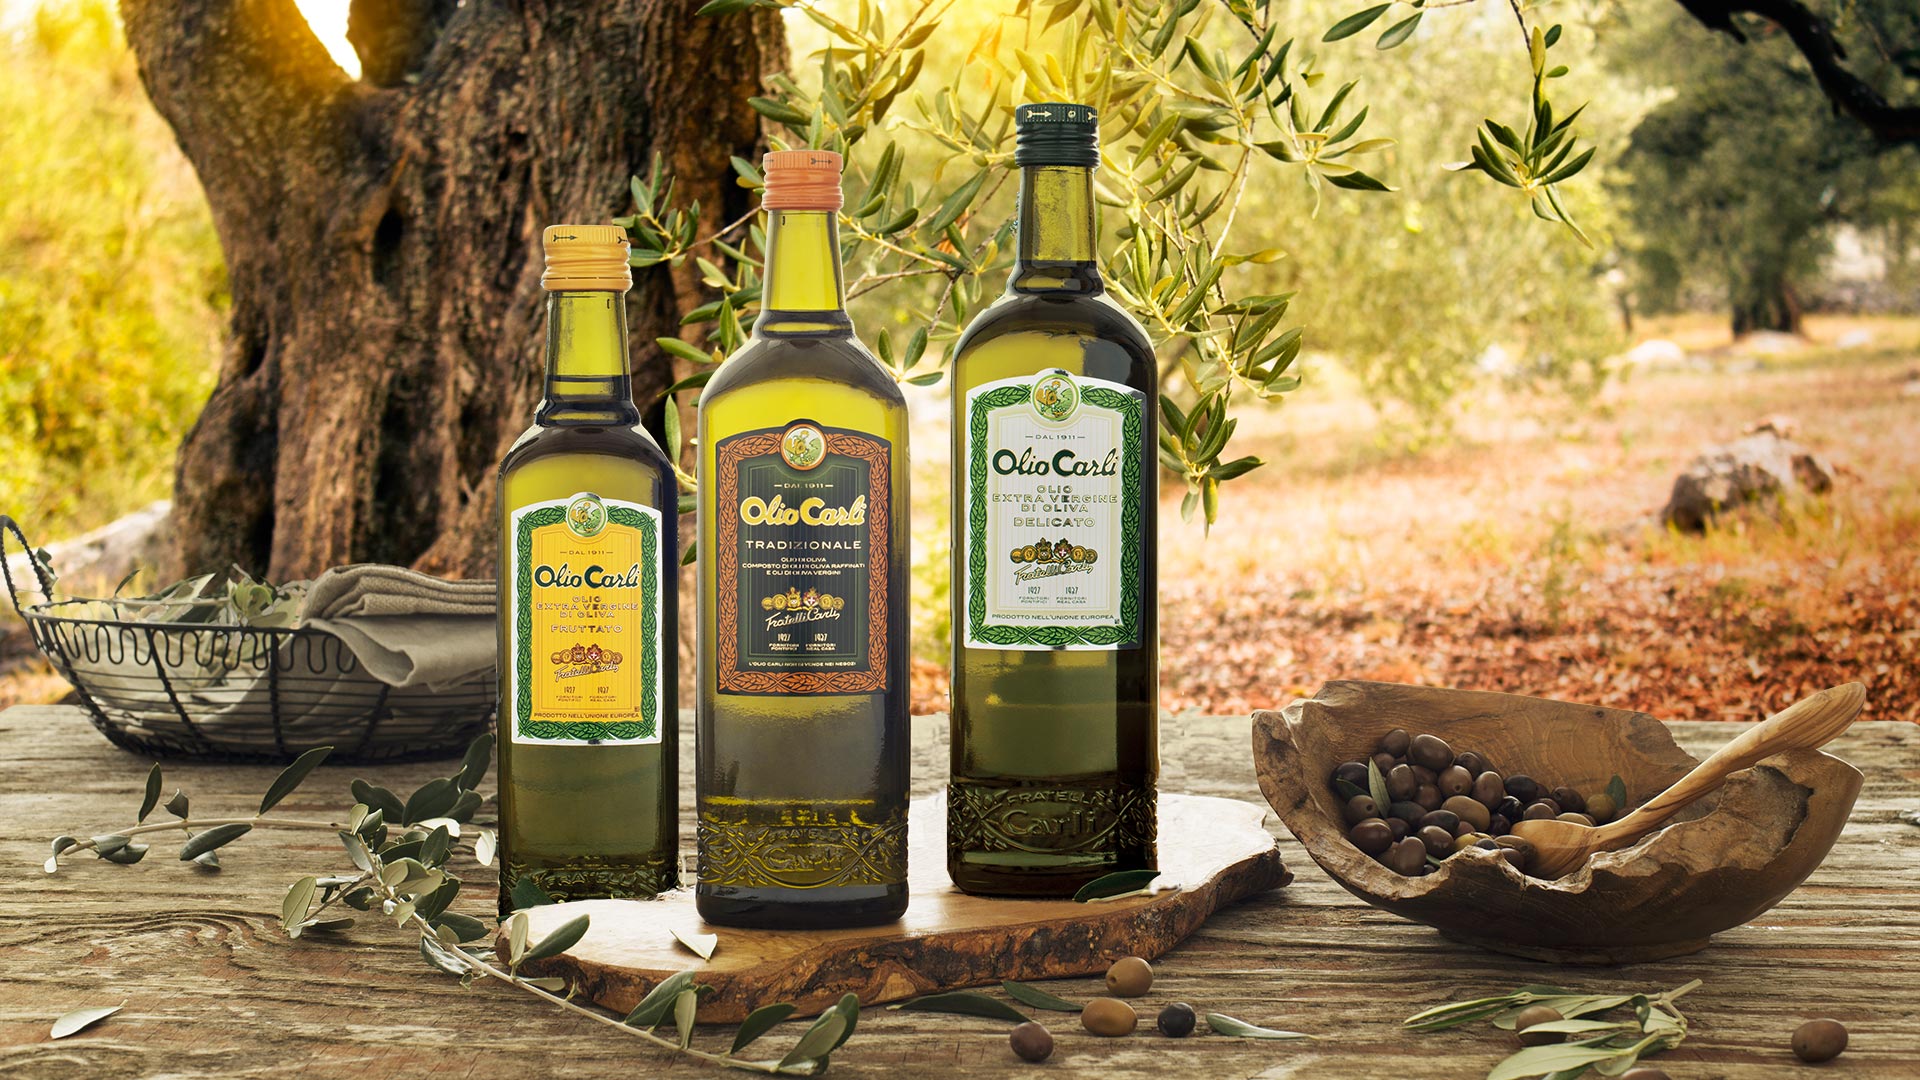 How to store olive oil – Fratelli Carli